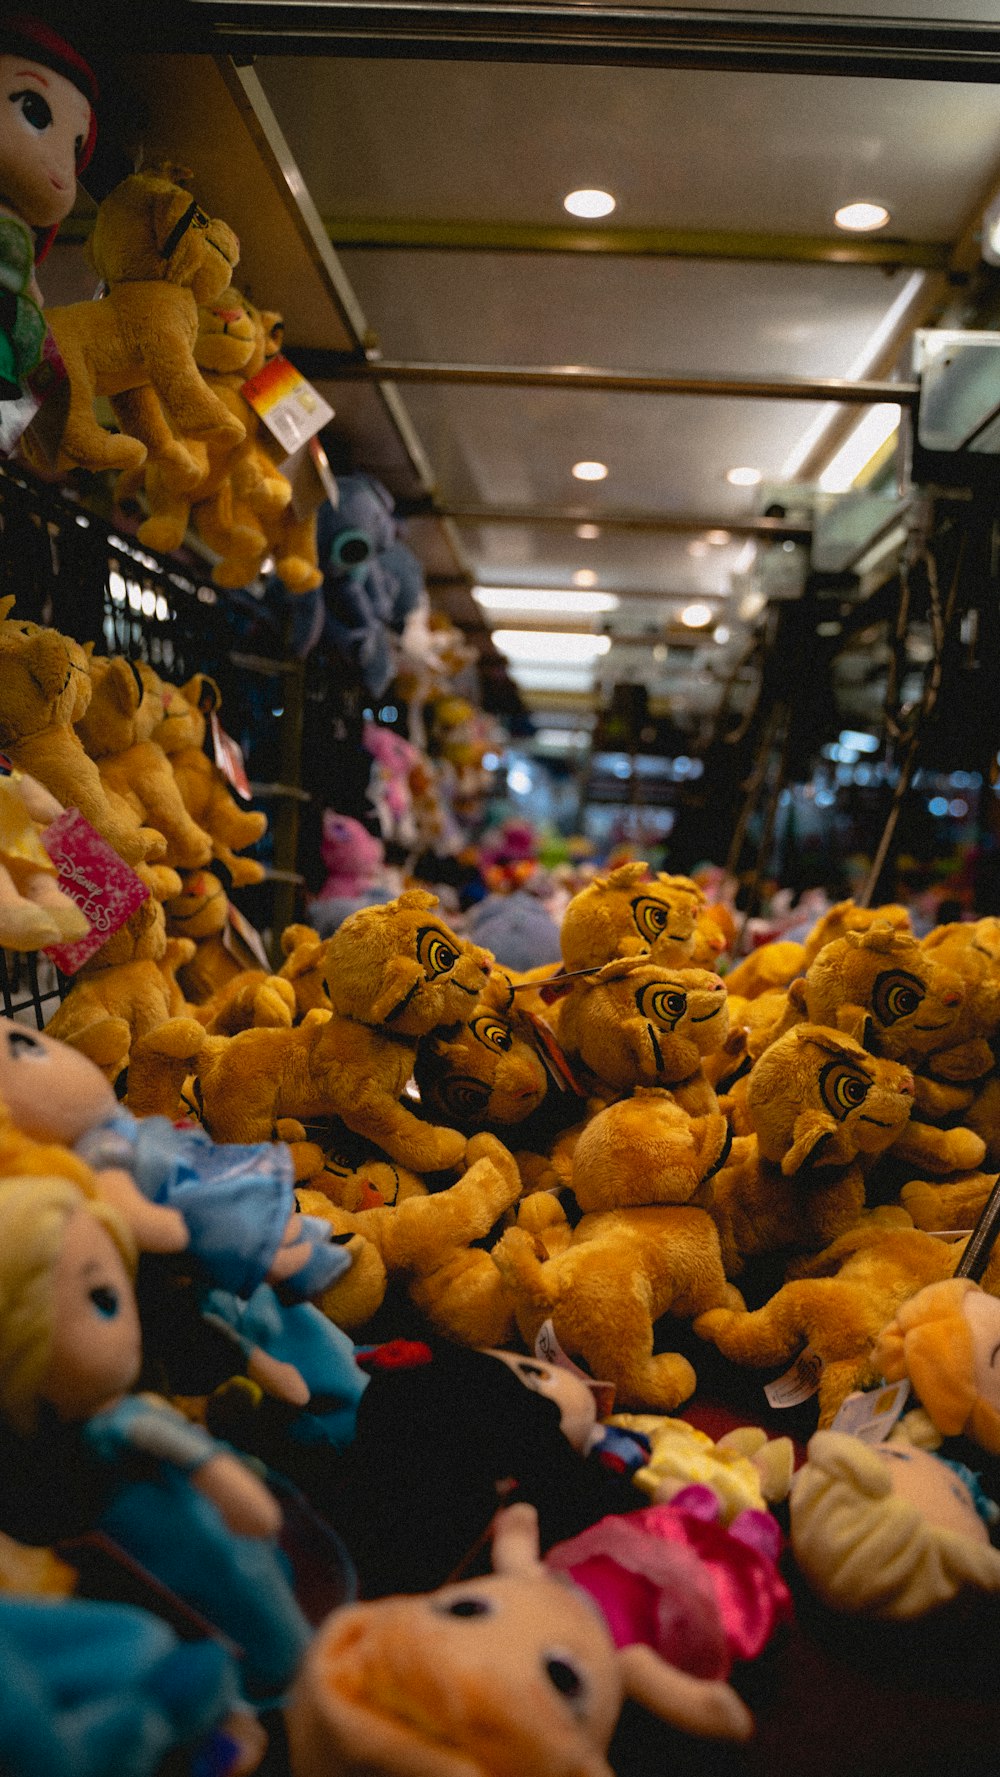 a large group of stuffed toys